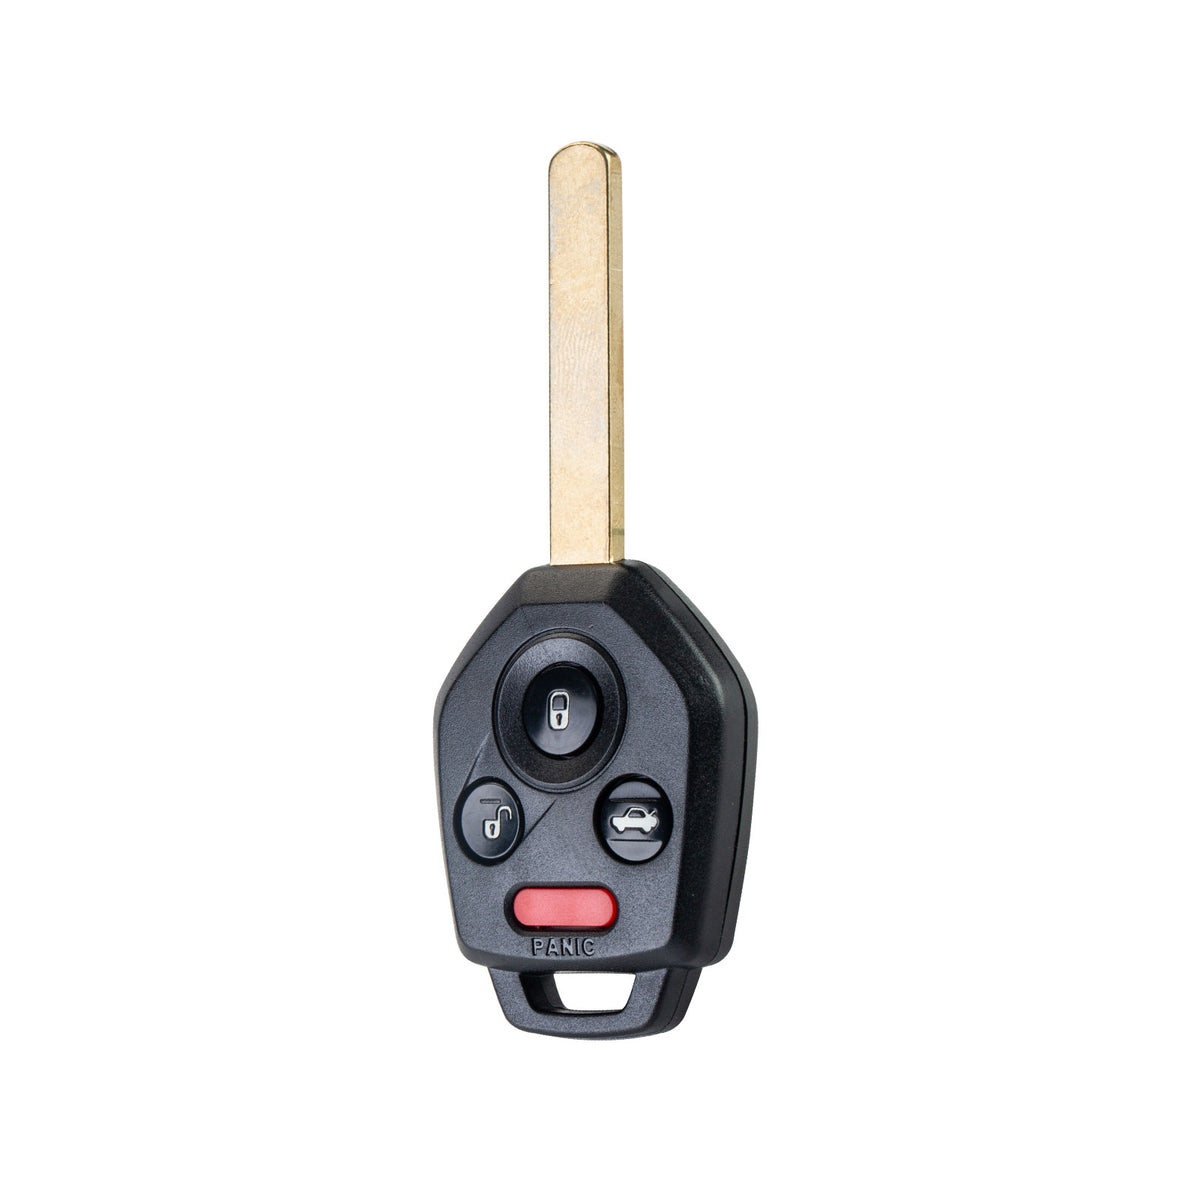 Keyless Entry Remote Control 433MHZ Replacement for 2011-2014 Subaru Outback Legacy CWTWB1U811 G CHIP   KR-G4SD